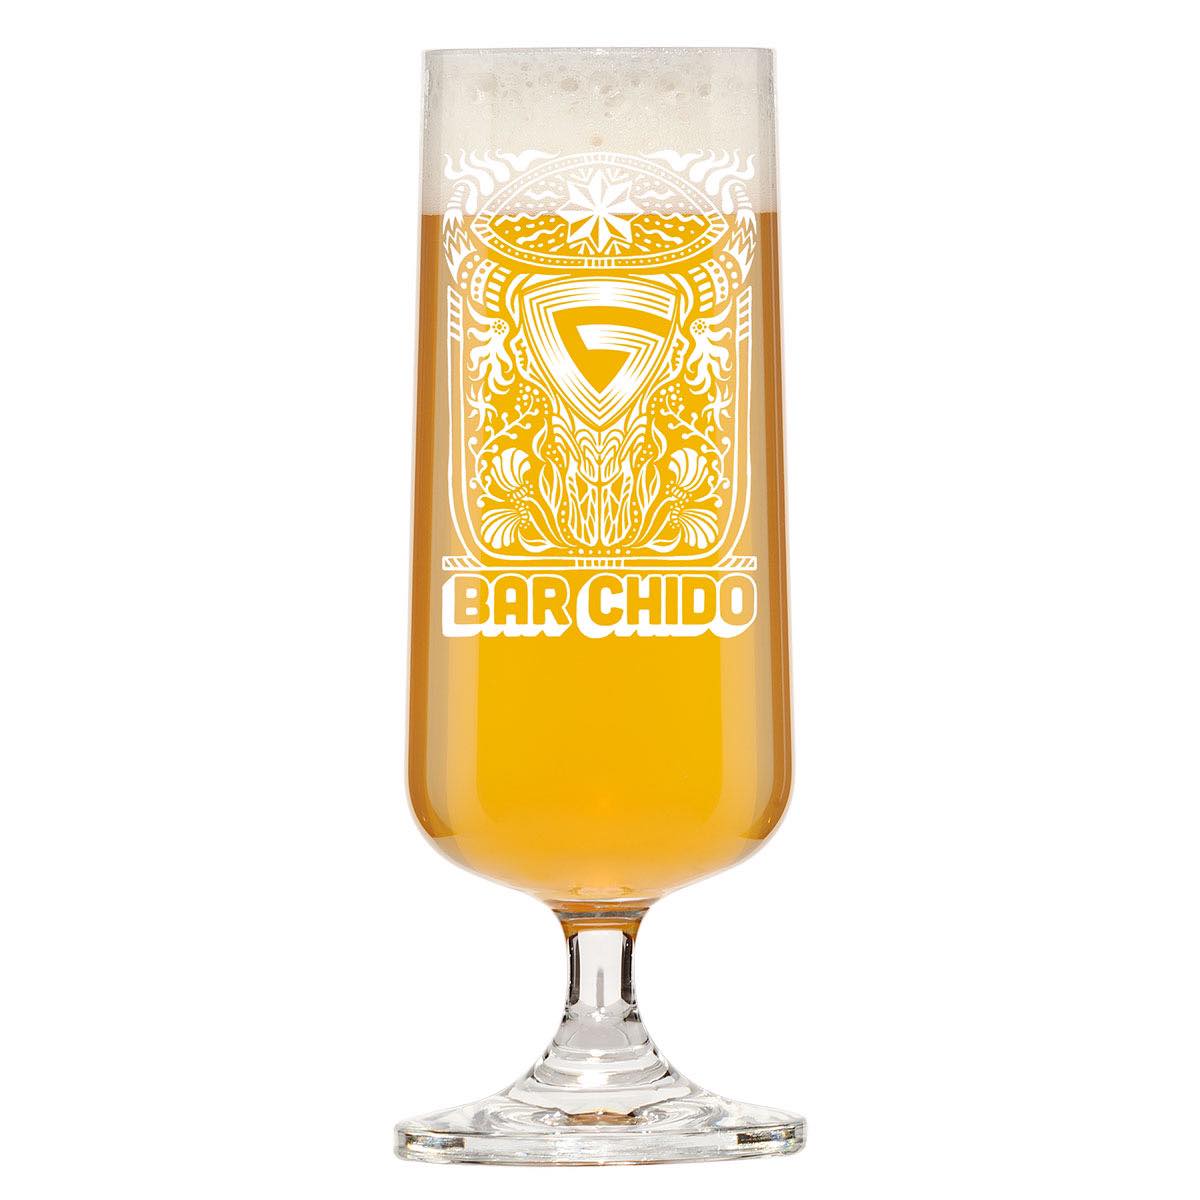 Chela Chido from Goldfinger Brewing Company